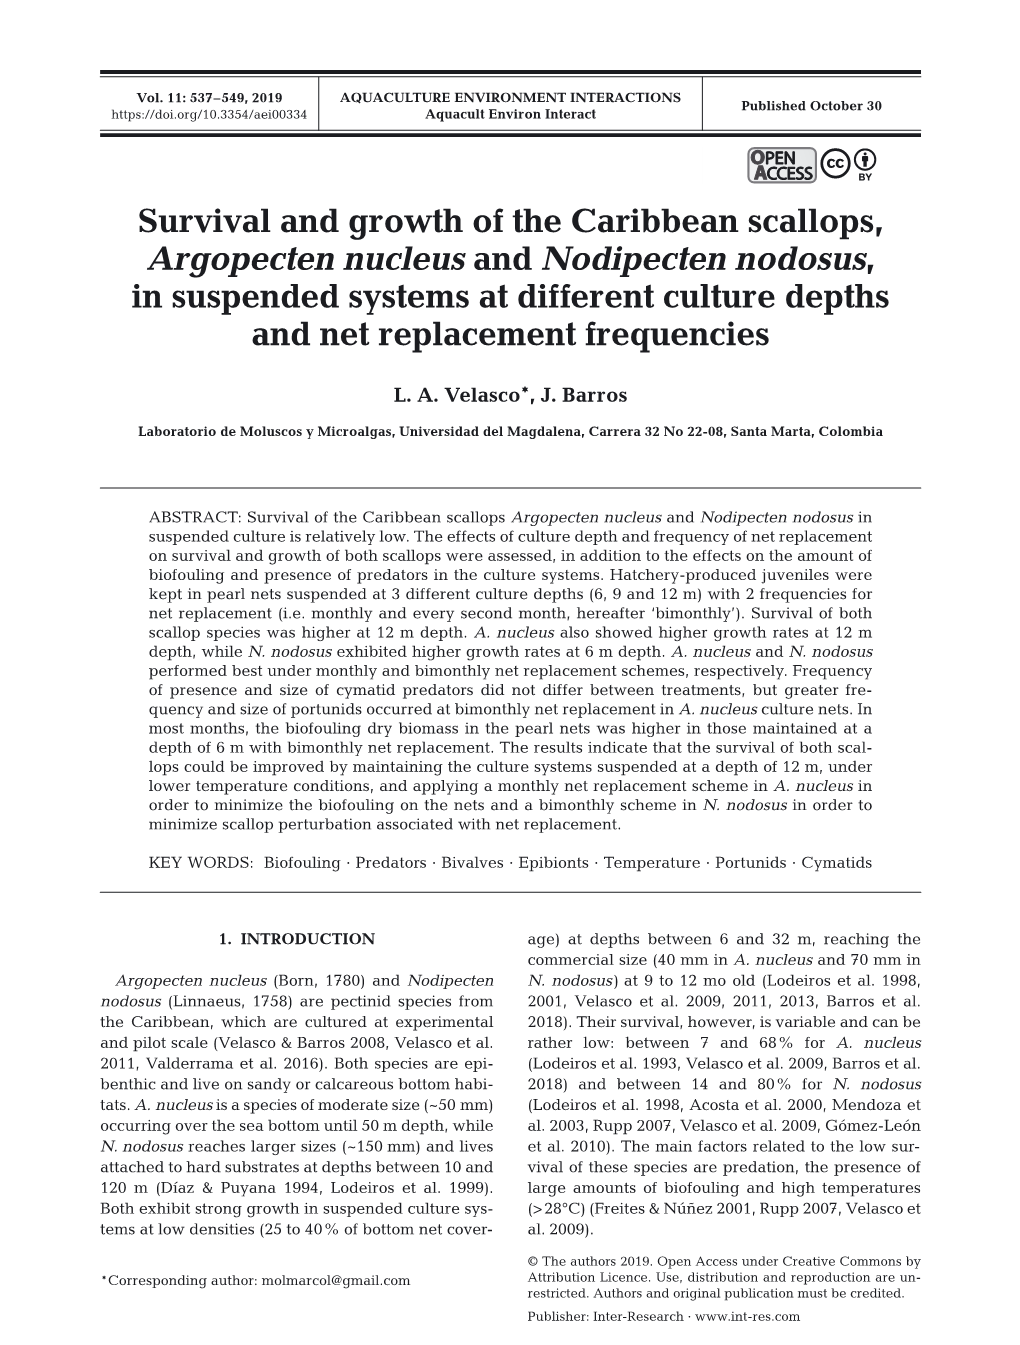 Survival and Growth of the Caribbean Scallops, Argopecten Nucleus And